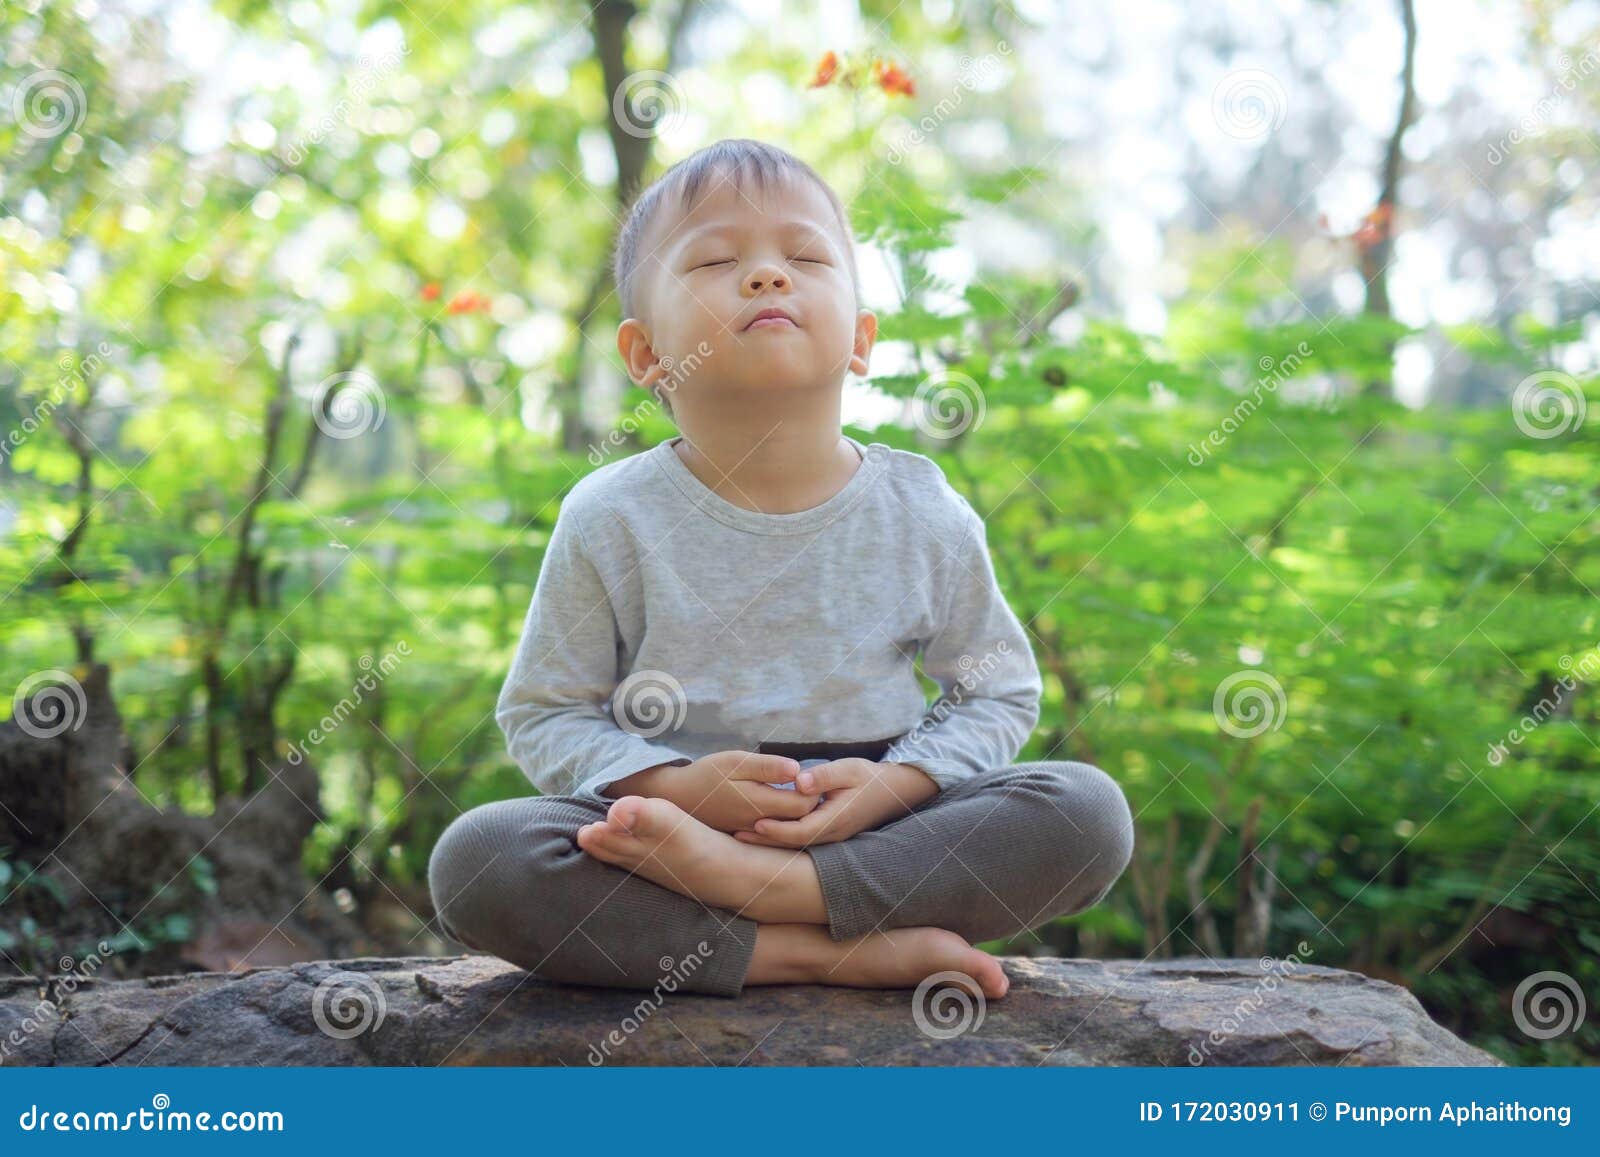 cute little asian 2 - 3 years old toddler baby boy child with eyes closed, barefoot practices yoga & meditating outdoors on nature